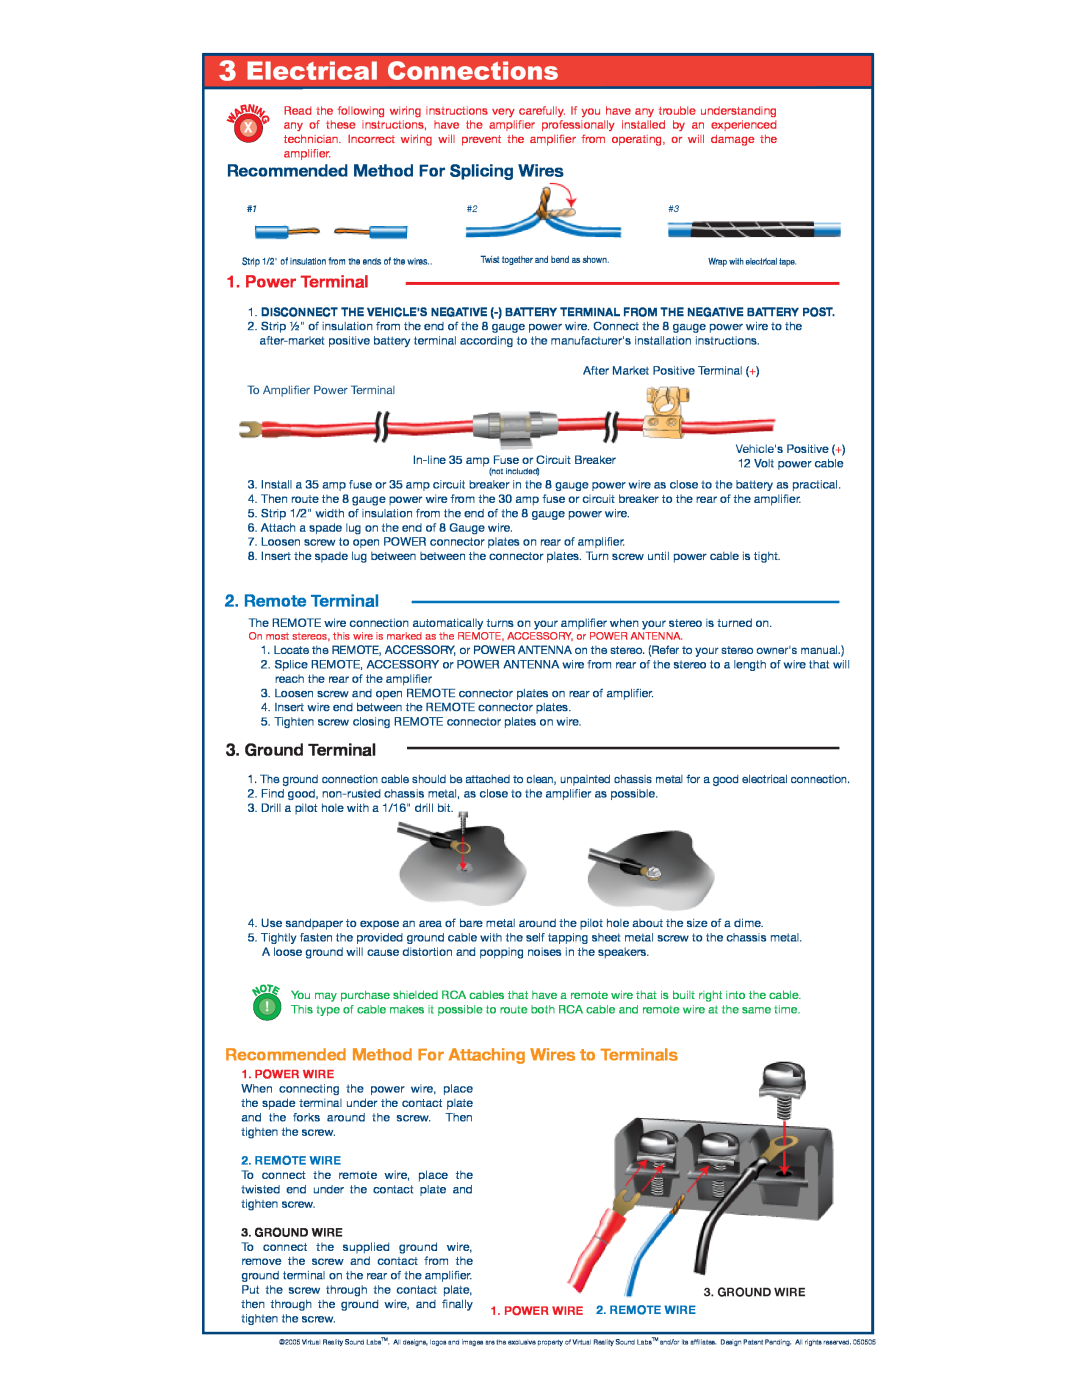 Roadmaster VRA1.0 Recommended Method For Splicing Wires, Power Wire, Power Terminal, Remote Terminal, Ground Terminal 